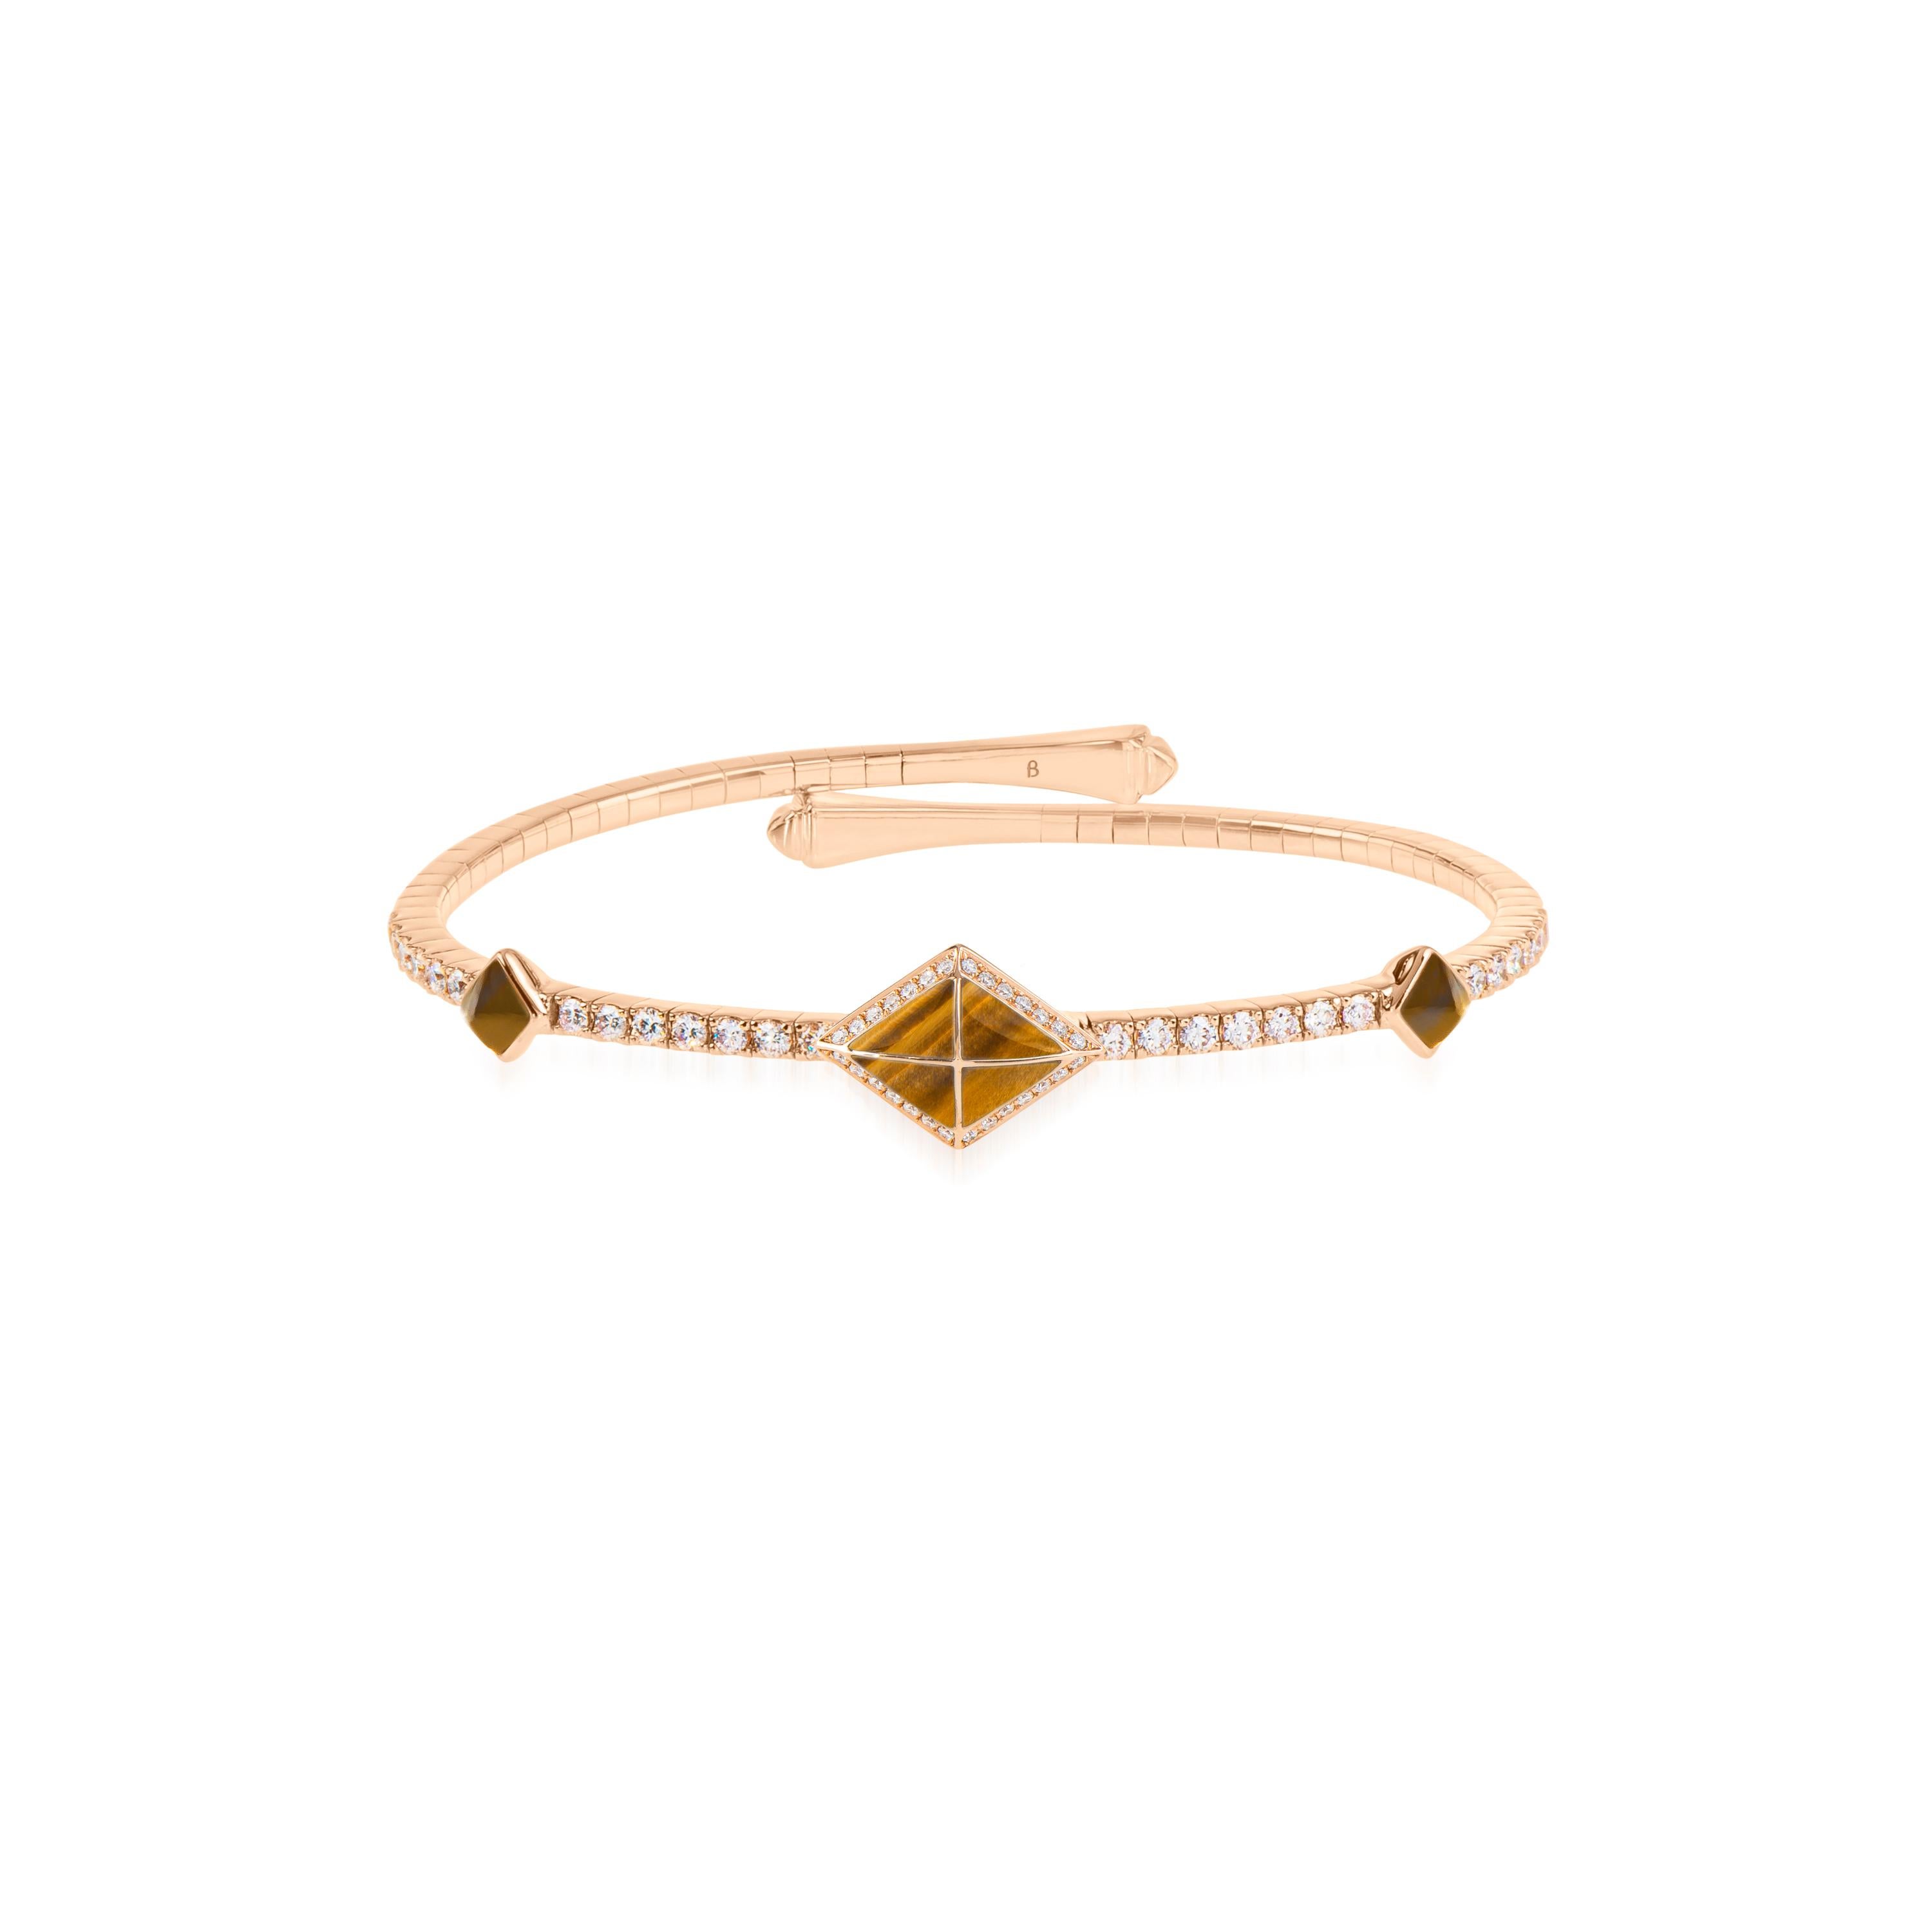 Through graphic, contemporary lines, Butani’s Tetra collection celebrates the beauty of symmetry while reimagining classic motifs of the past. 

Offering a simple elegance, the Tetra Zenith Bangle features a distinctive rhombus motif that gleams